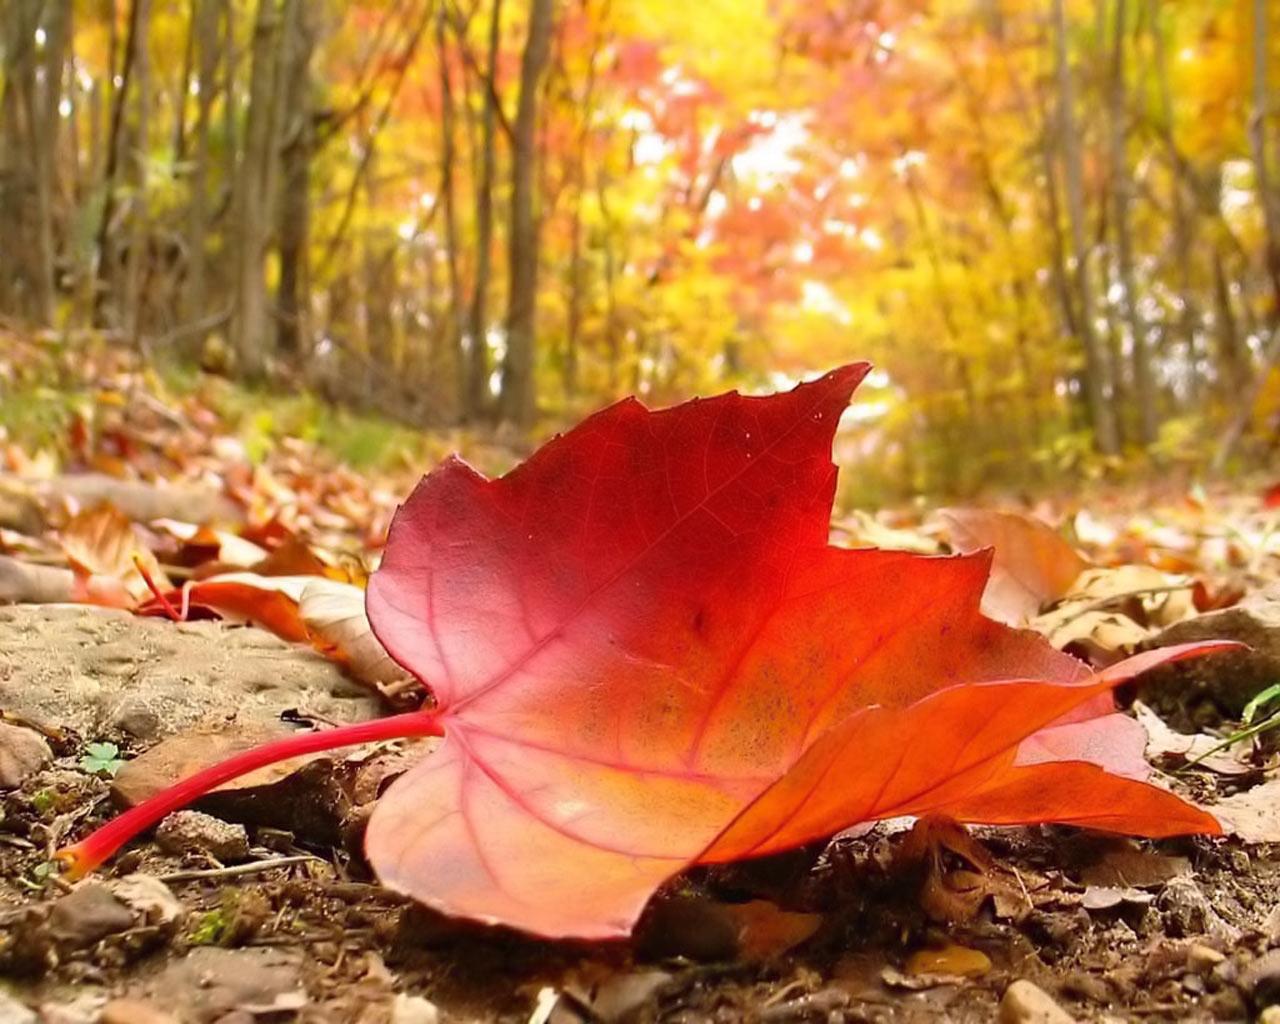 Leaves Autumn Wallpapers Wallpaper Cave